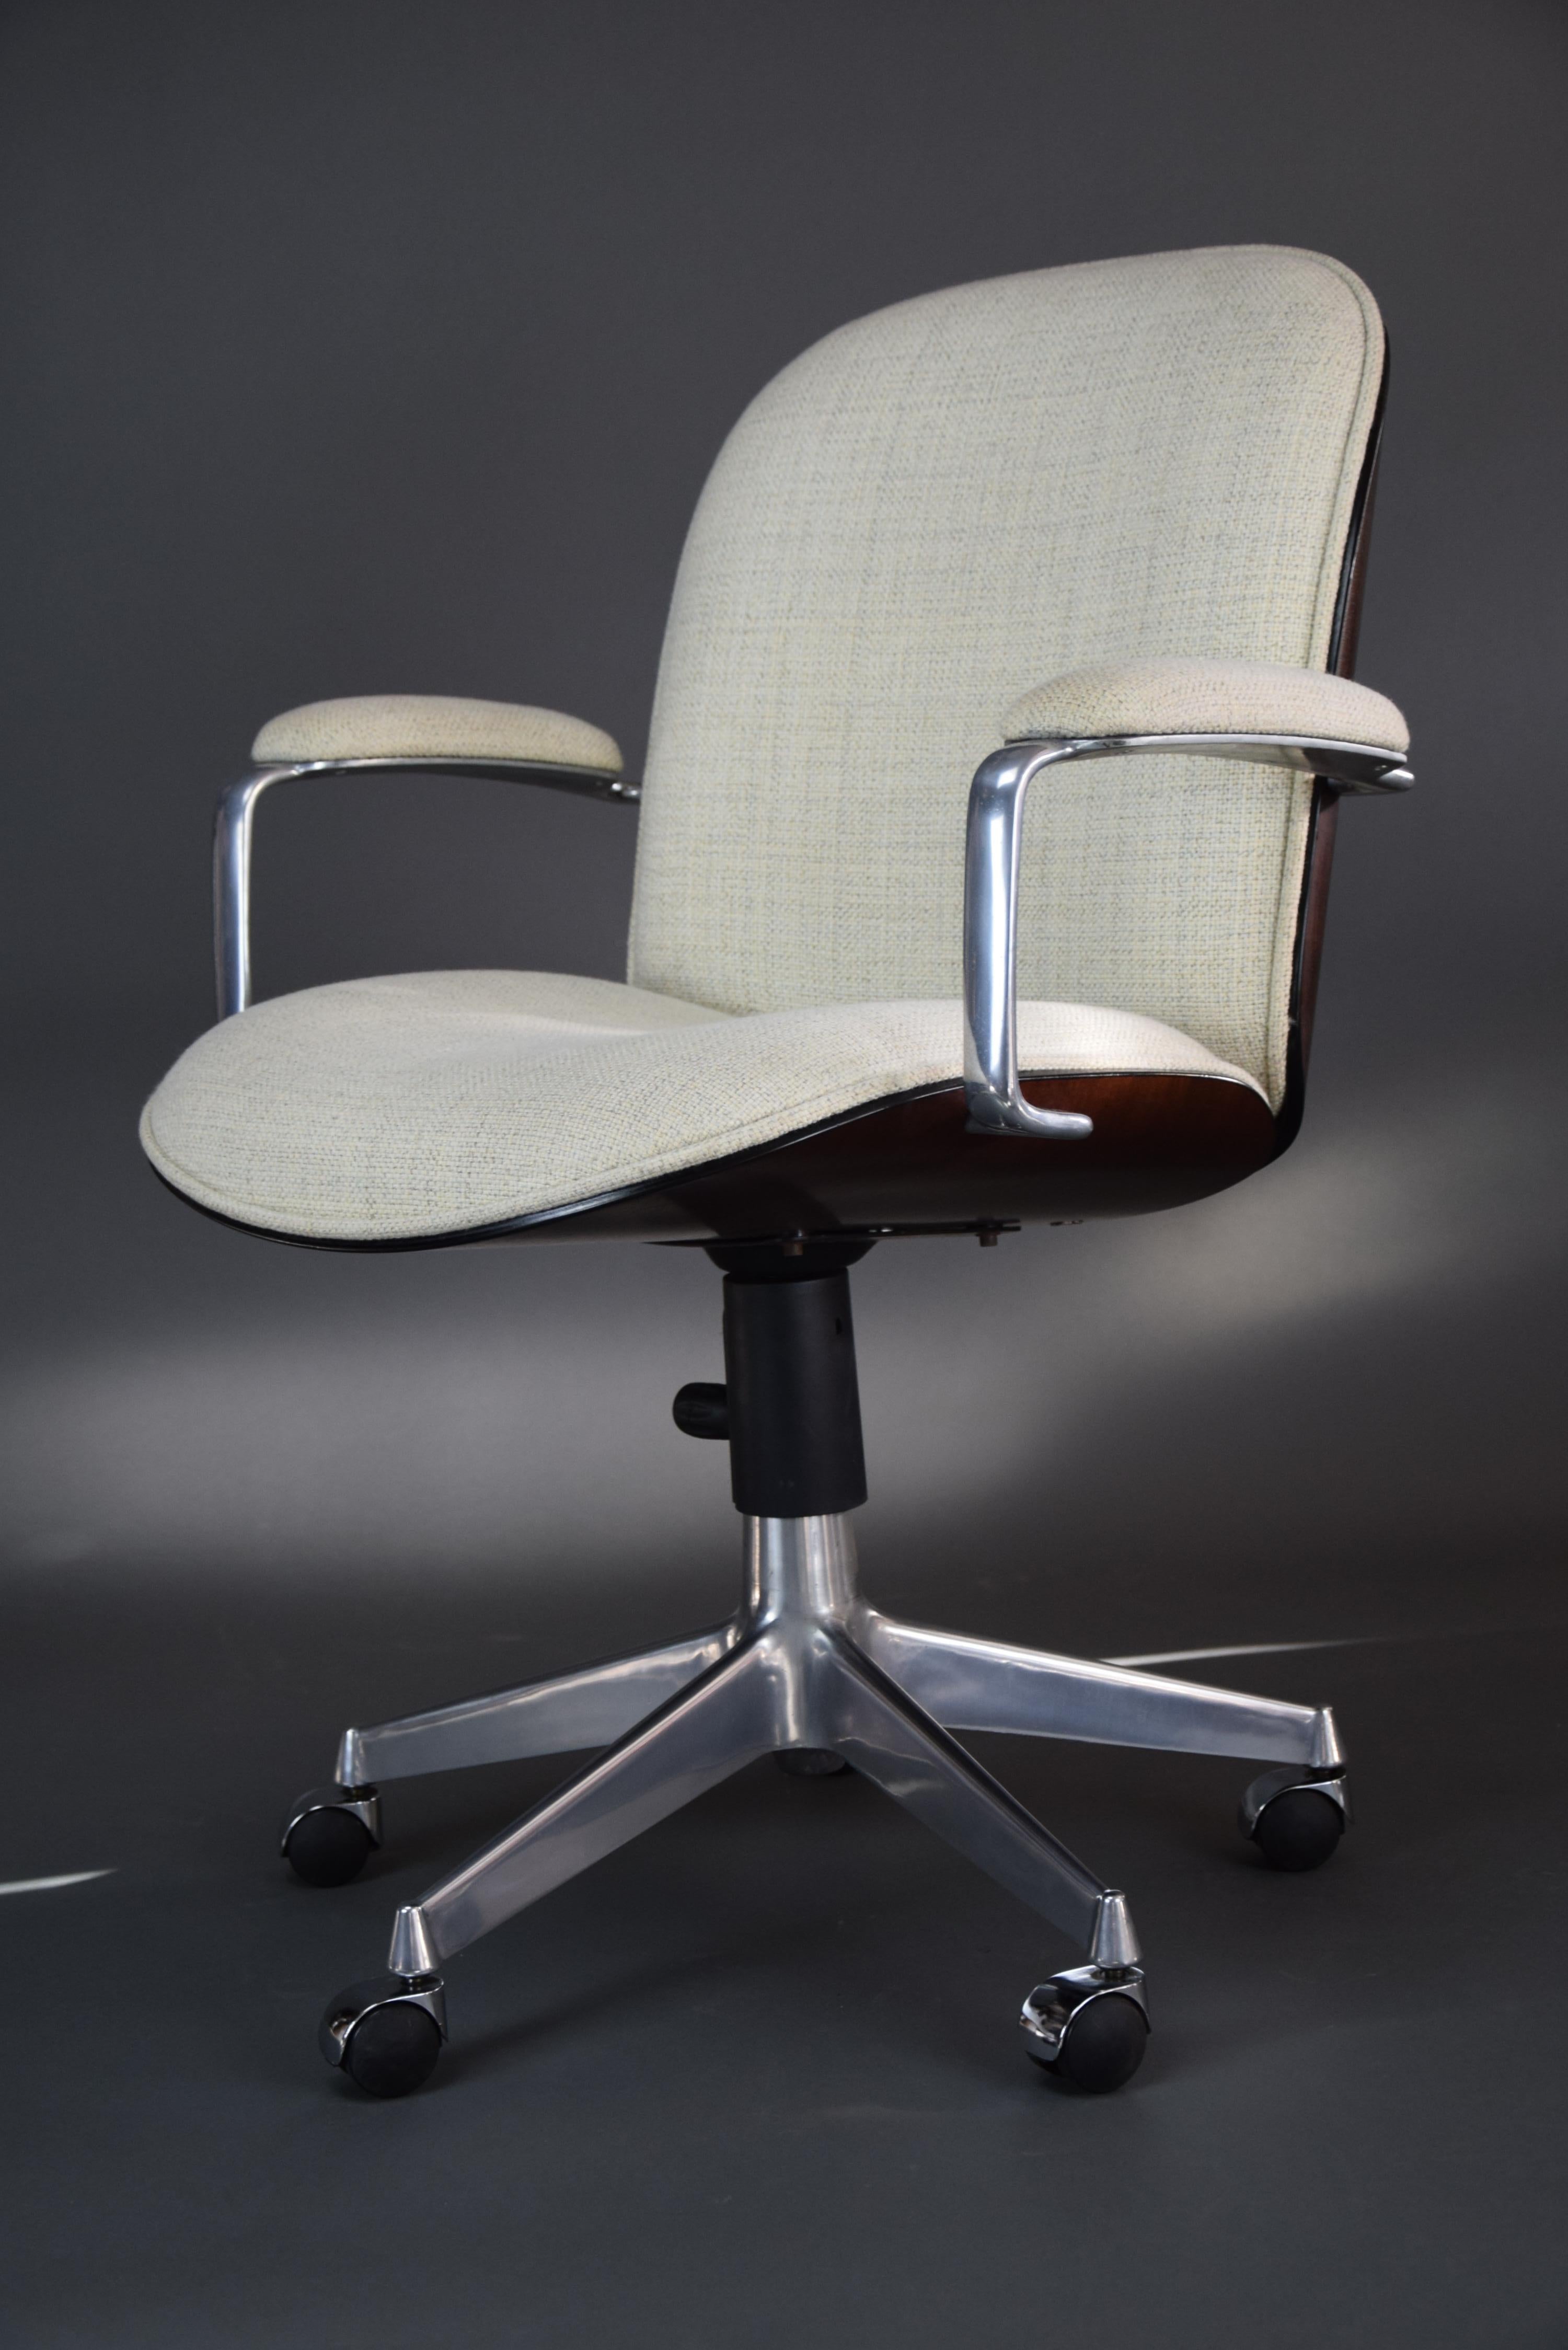 Elevate your office space with this rare, mid century modern desk chair designed by the renowned Ico Parisi for MIM Rome, Italy.

This chair is not only stylish but also a work of art that will be the focal point of any room. The sleek and elegant